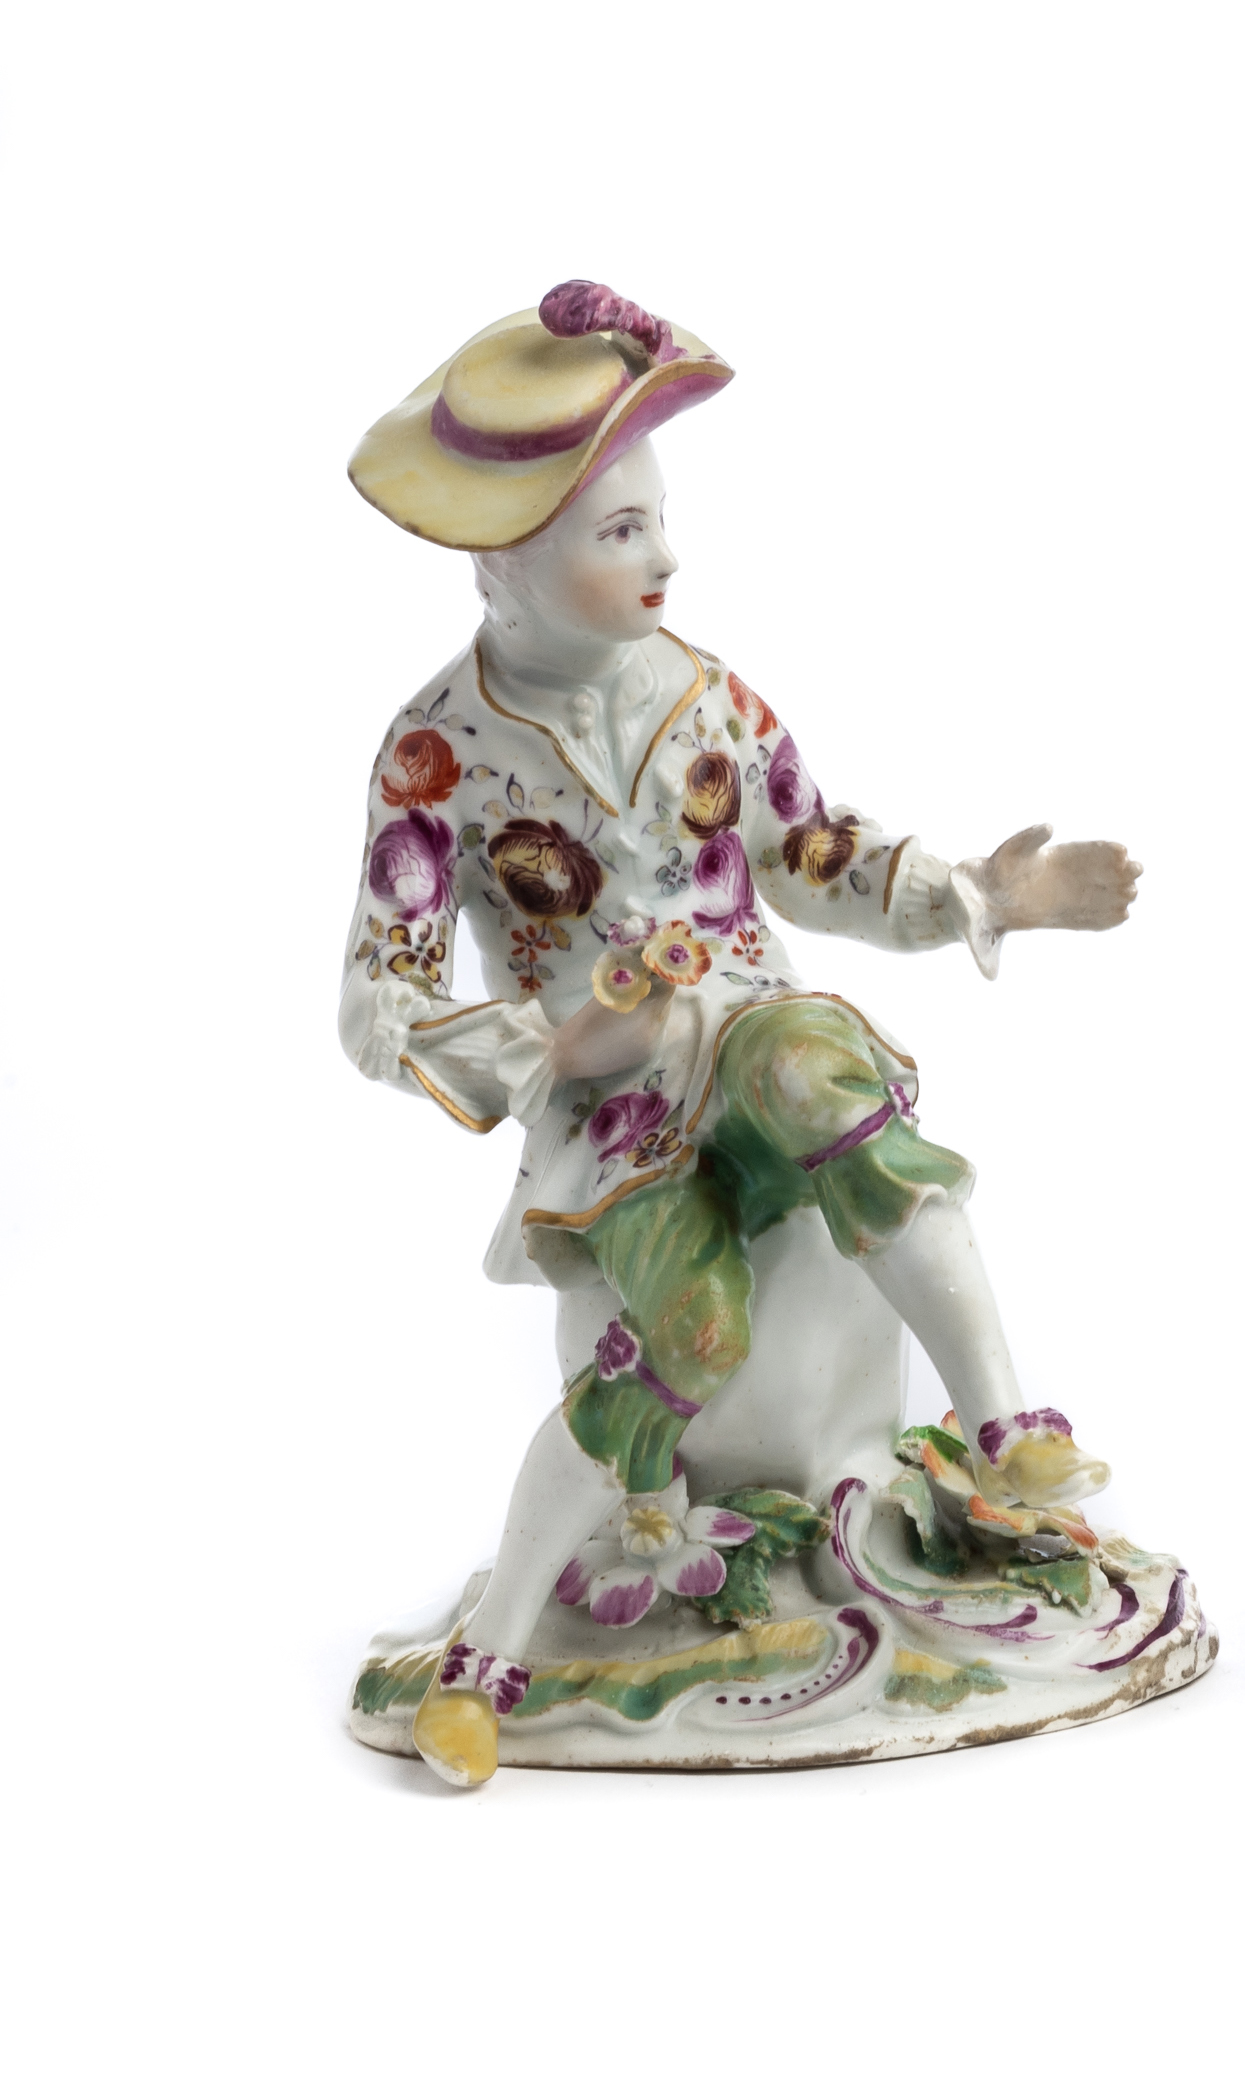 A DERBY FIGURE OF A YOUTH, CIRCA 1758-60